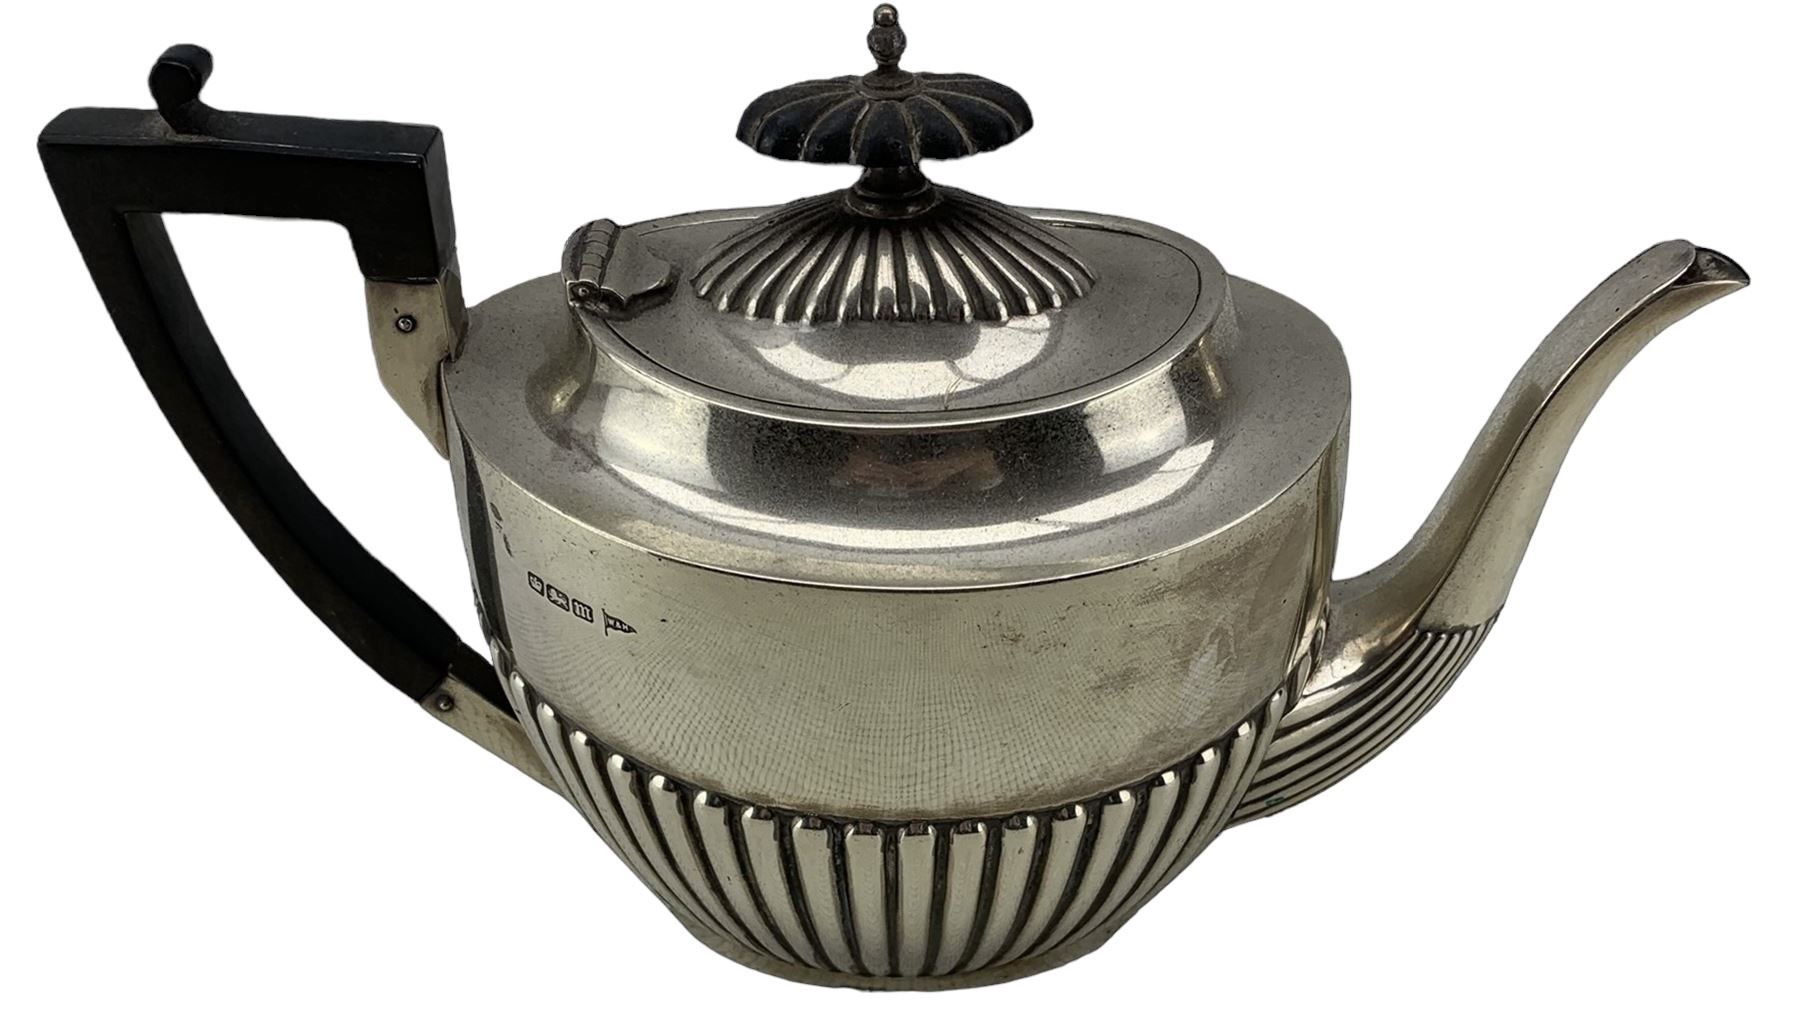 Edwardian silver oval teapot with half body reeded decoration - Image 2 of 4